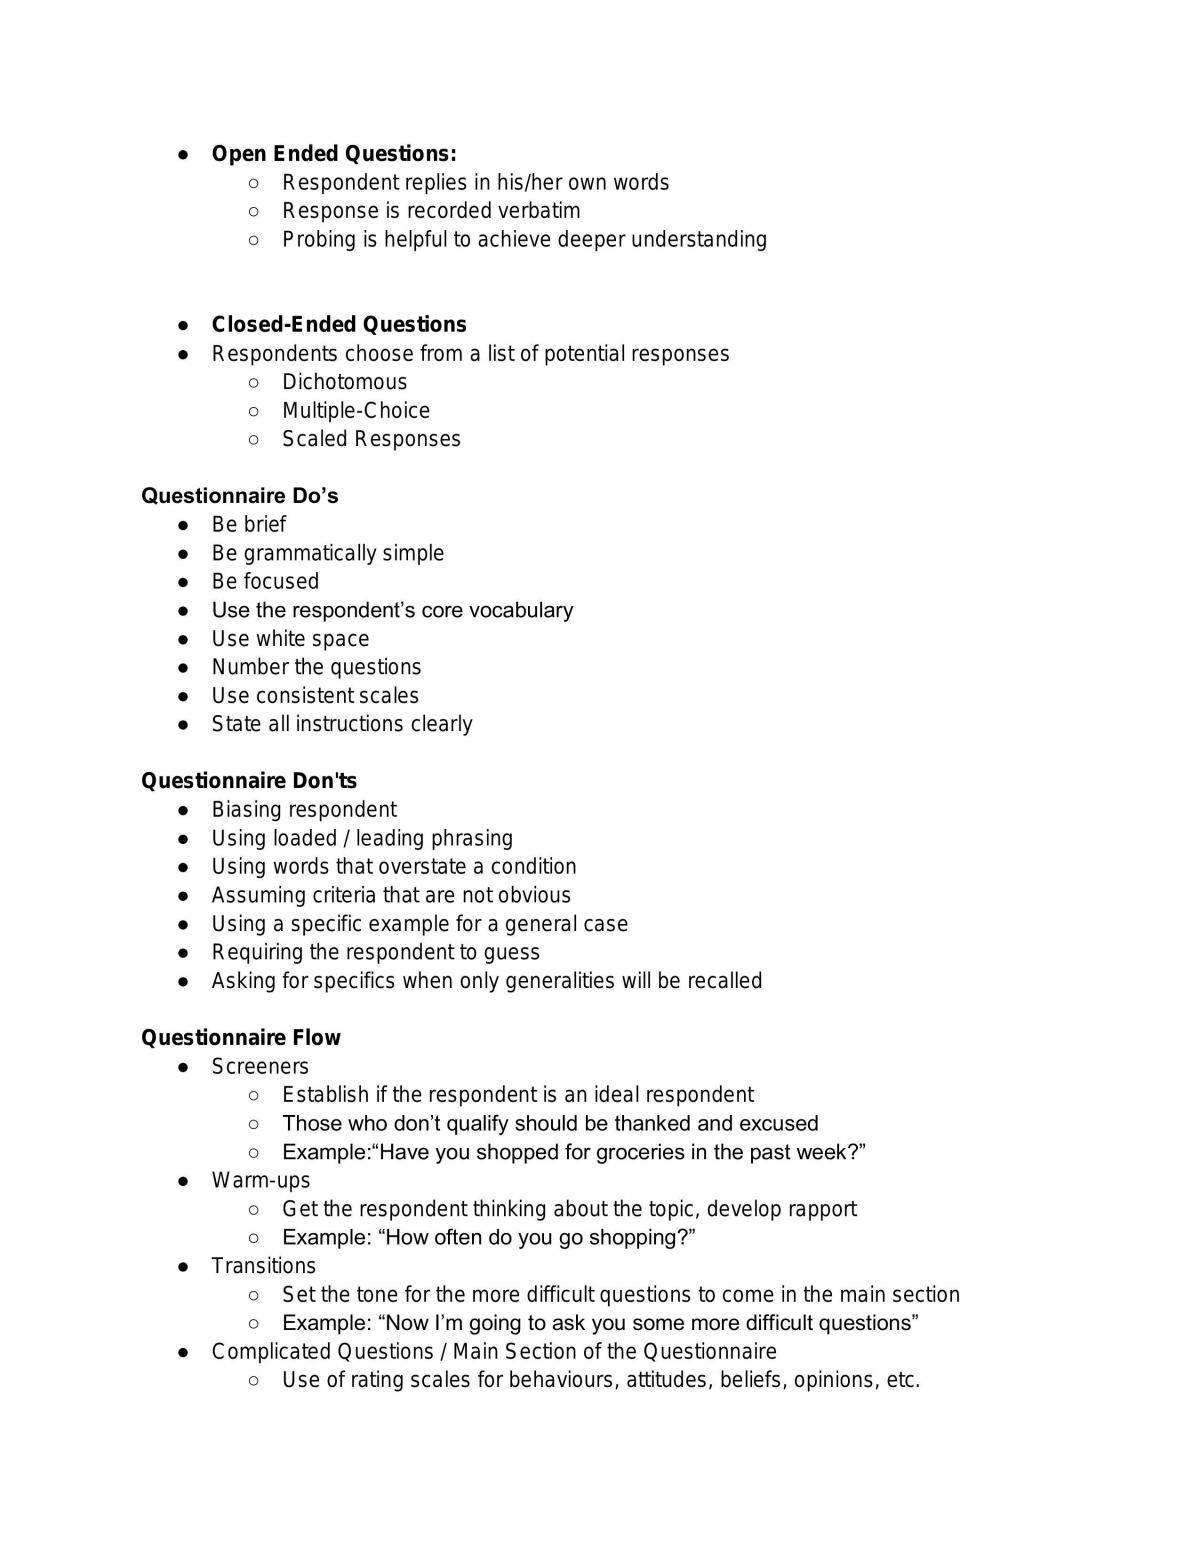 Marketing Research Entire Course Notes - Page 26